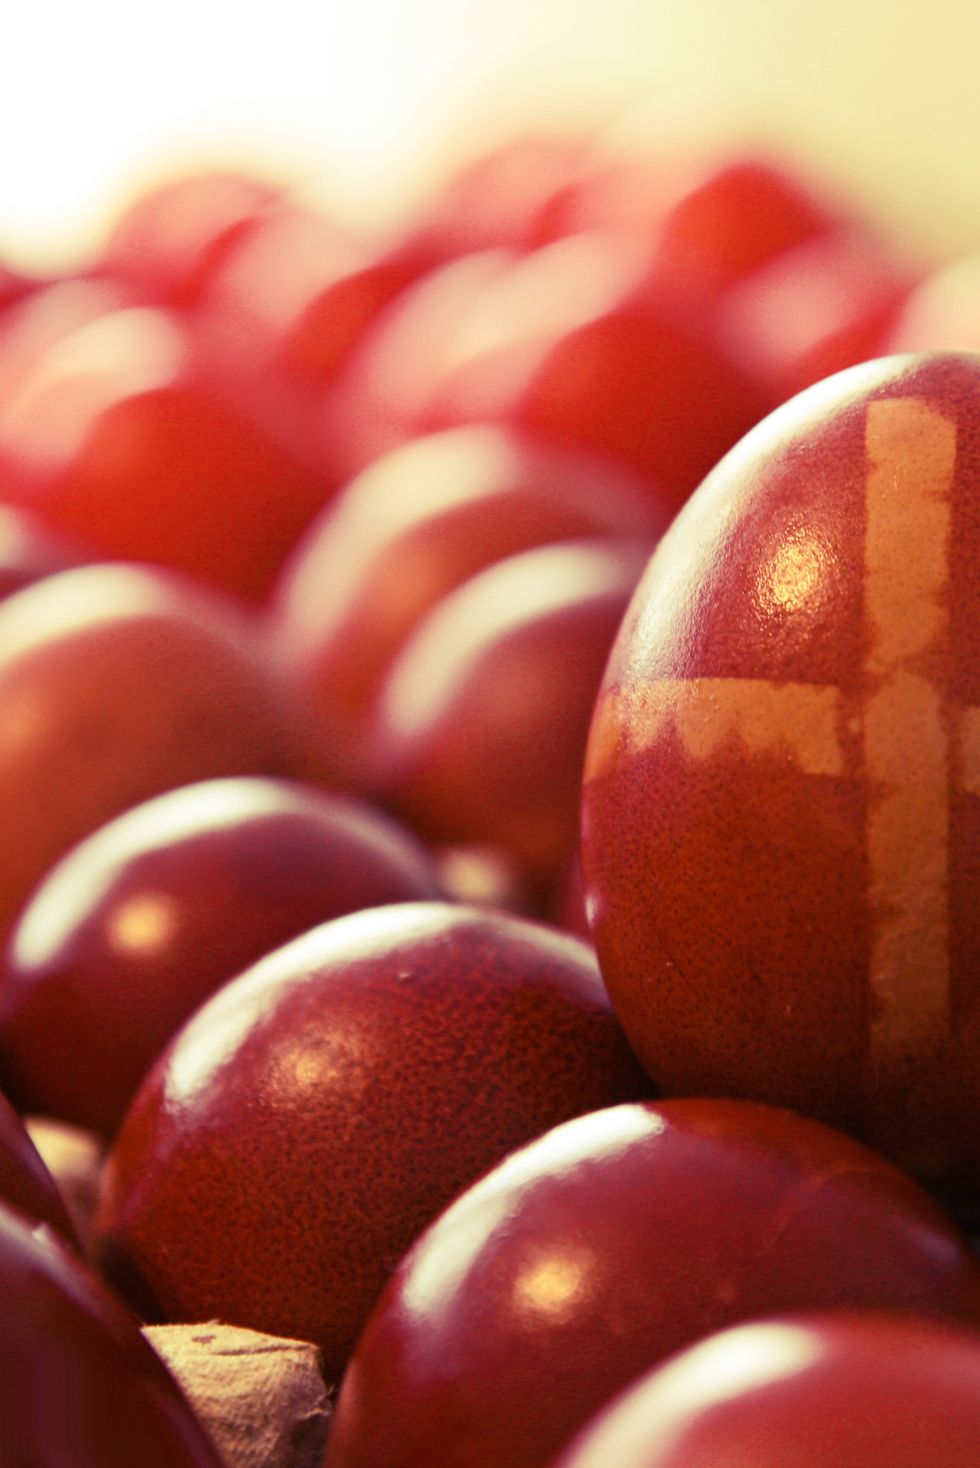 easter traditions orthodox easter eggs